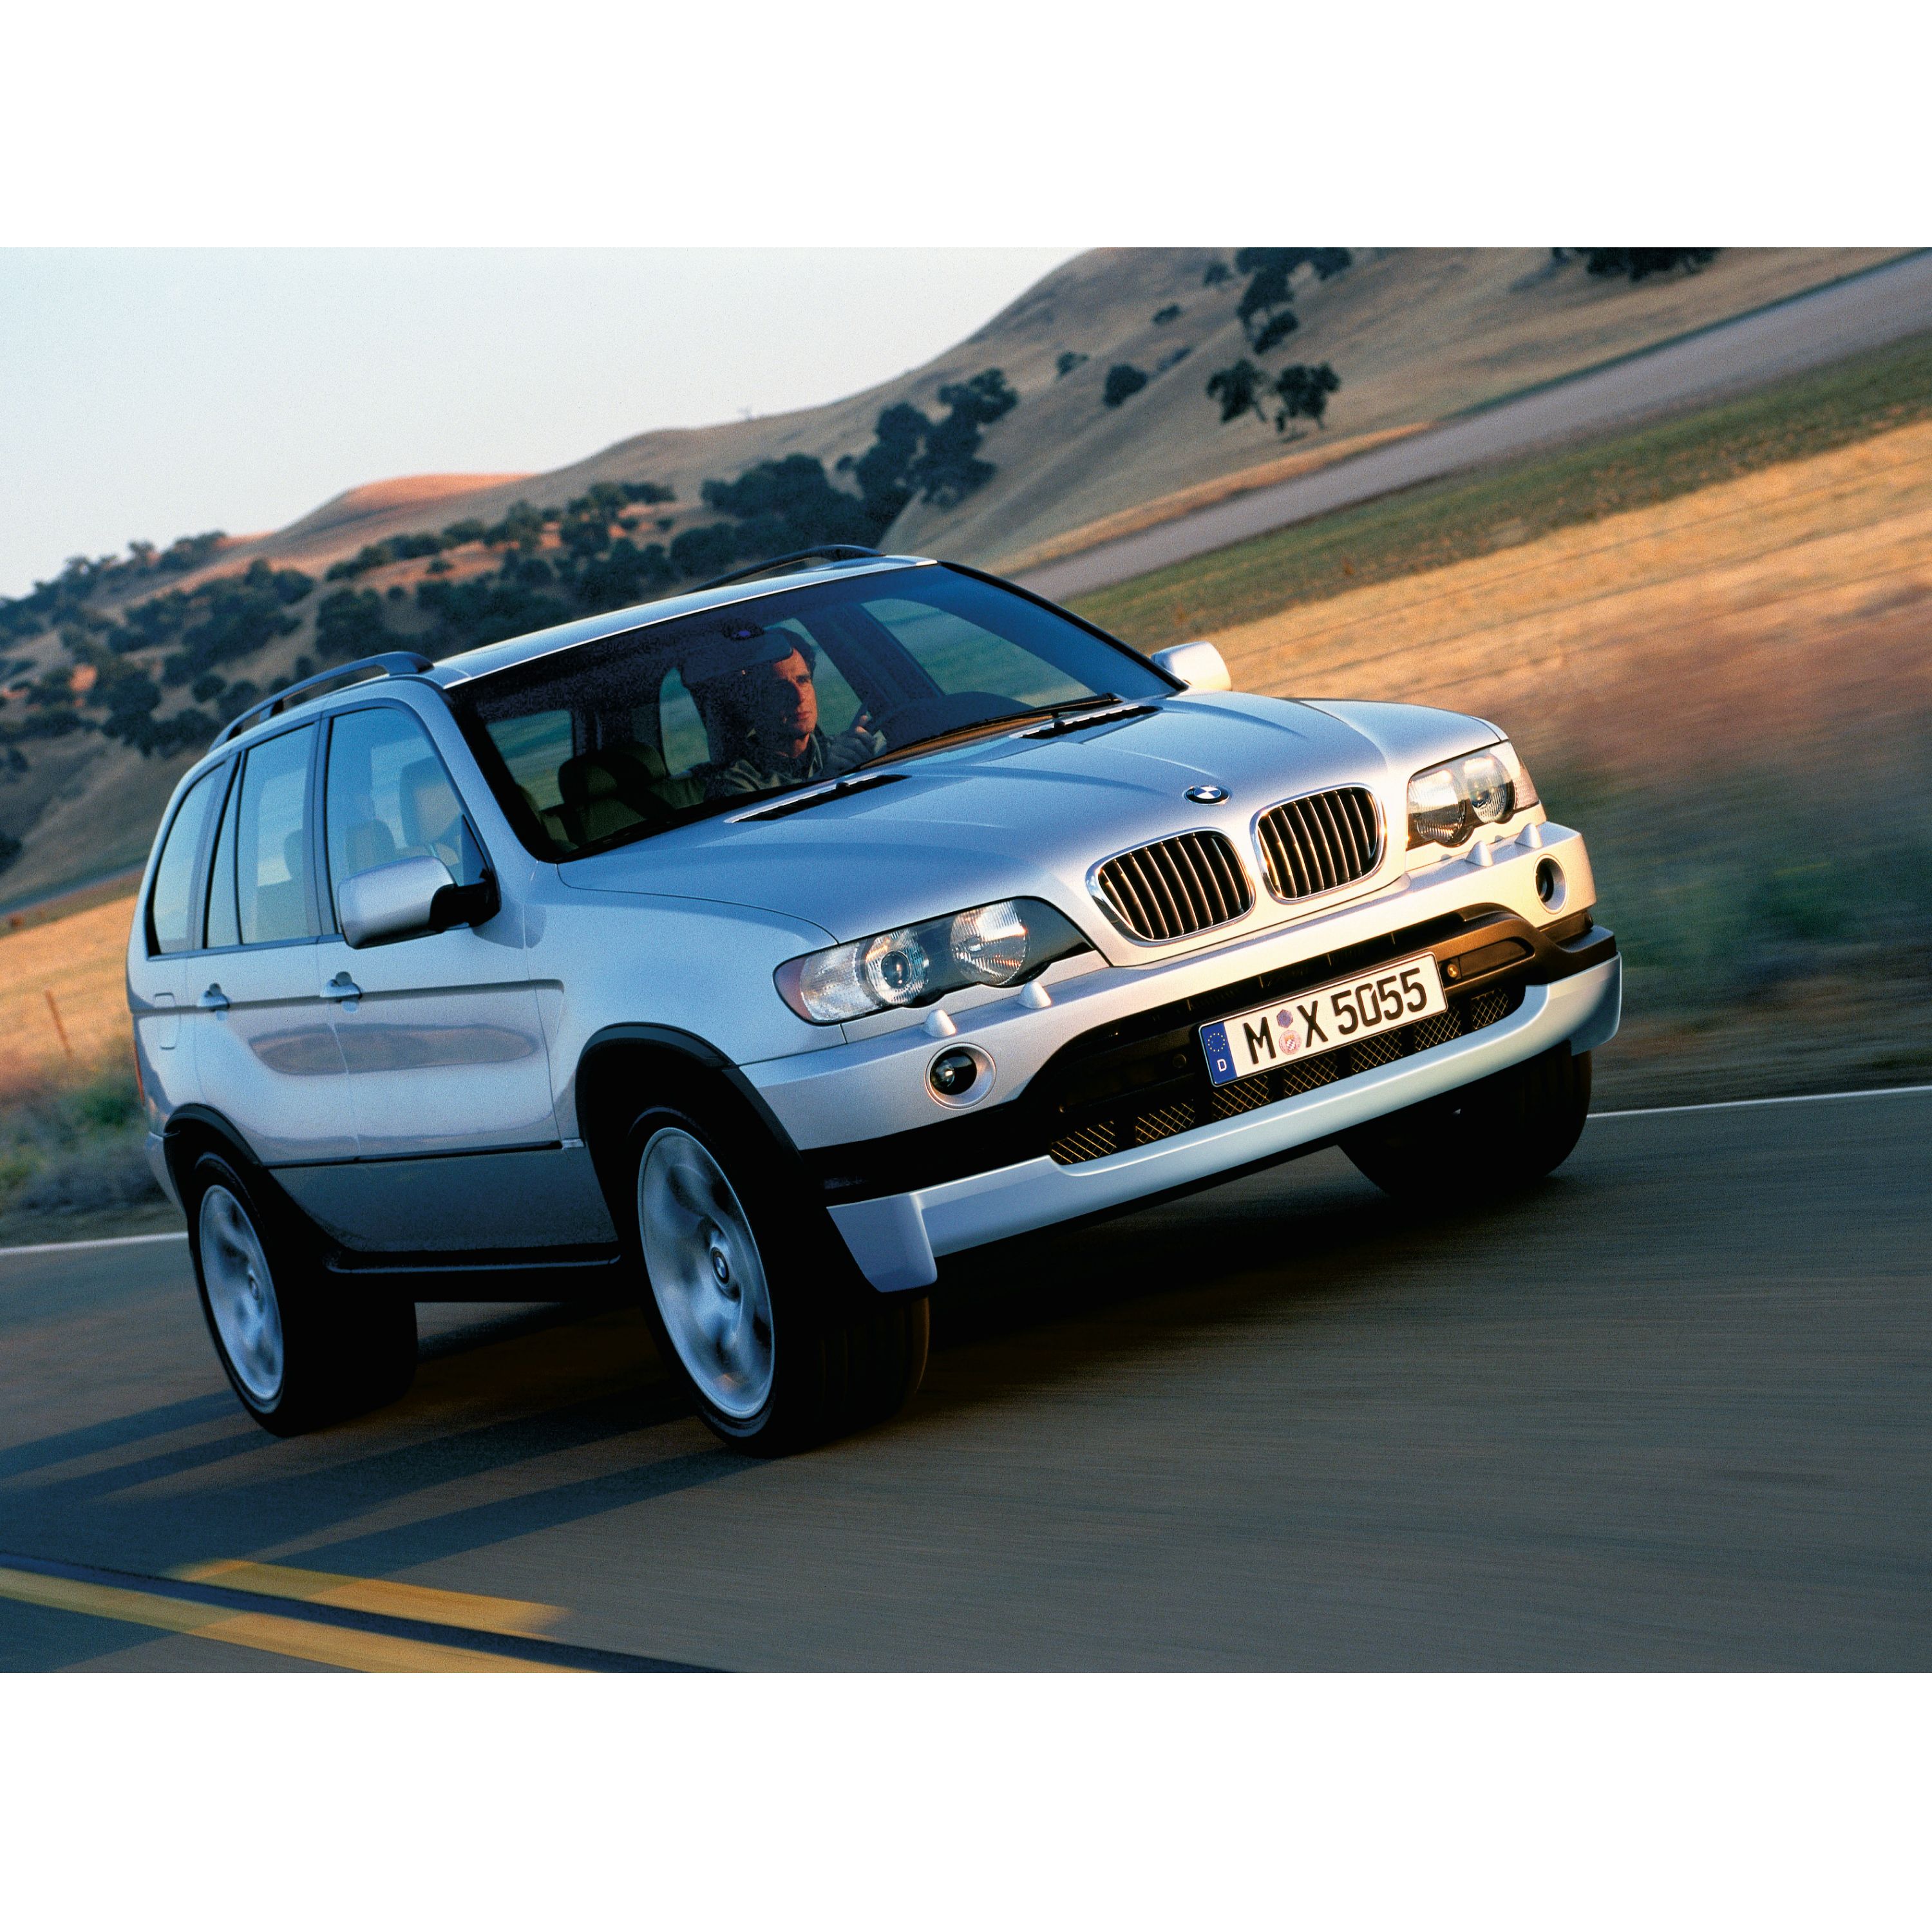 BMW X5 E53 SUV driving on a country rode in front of wheat fields